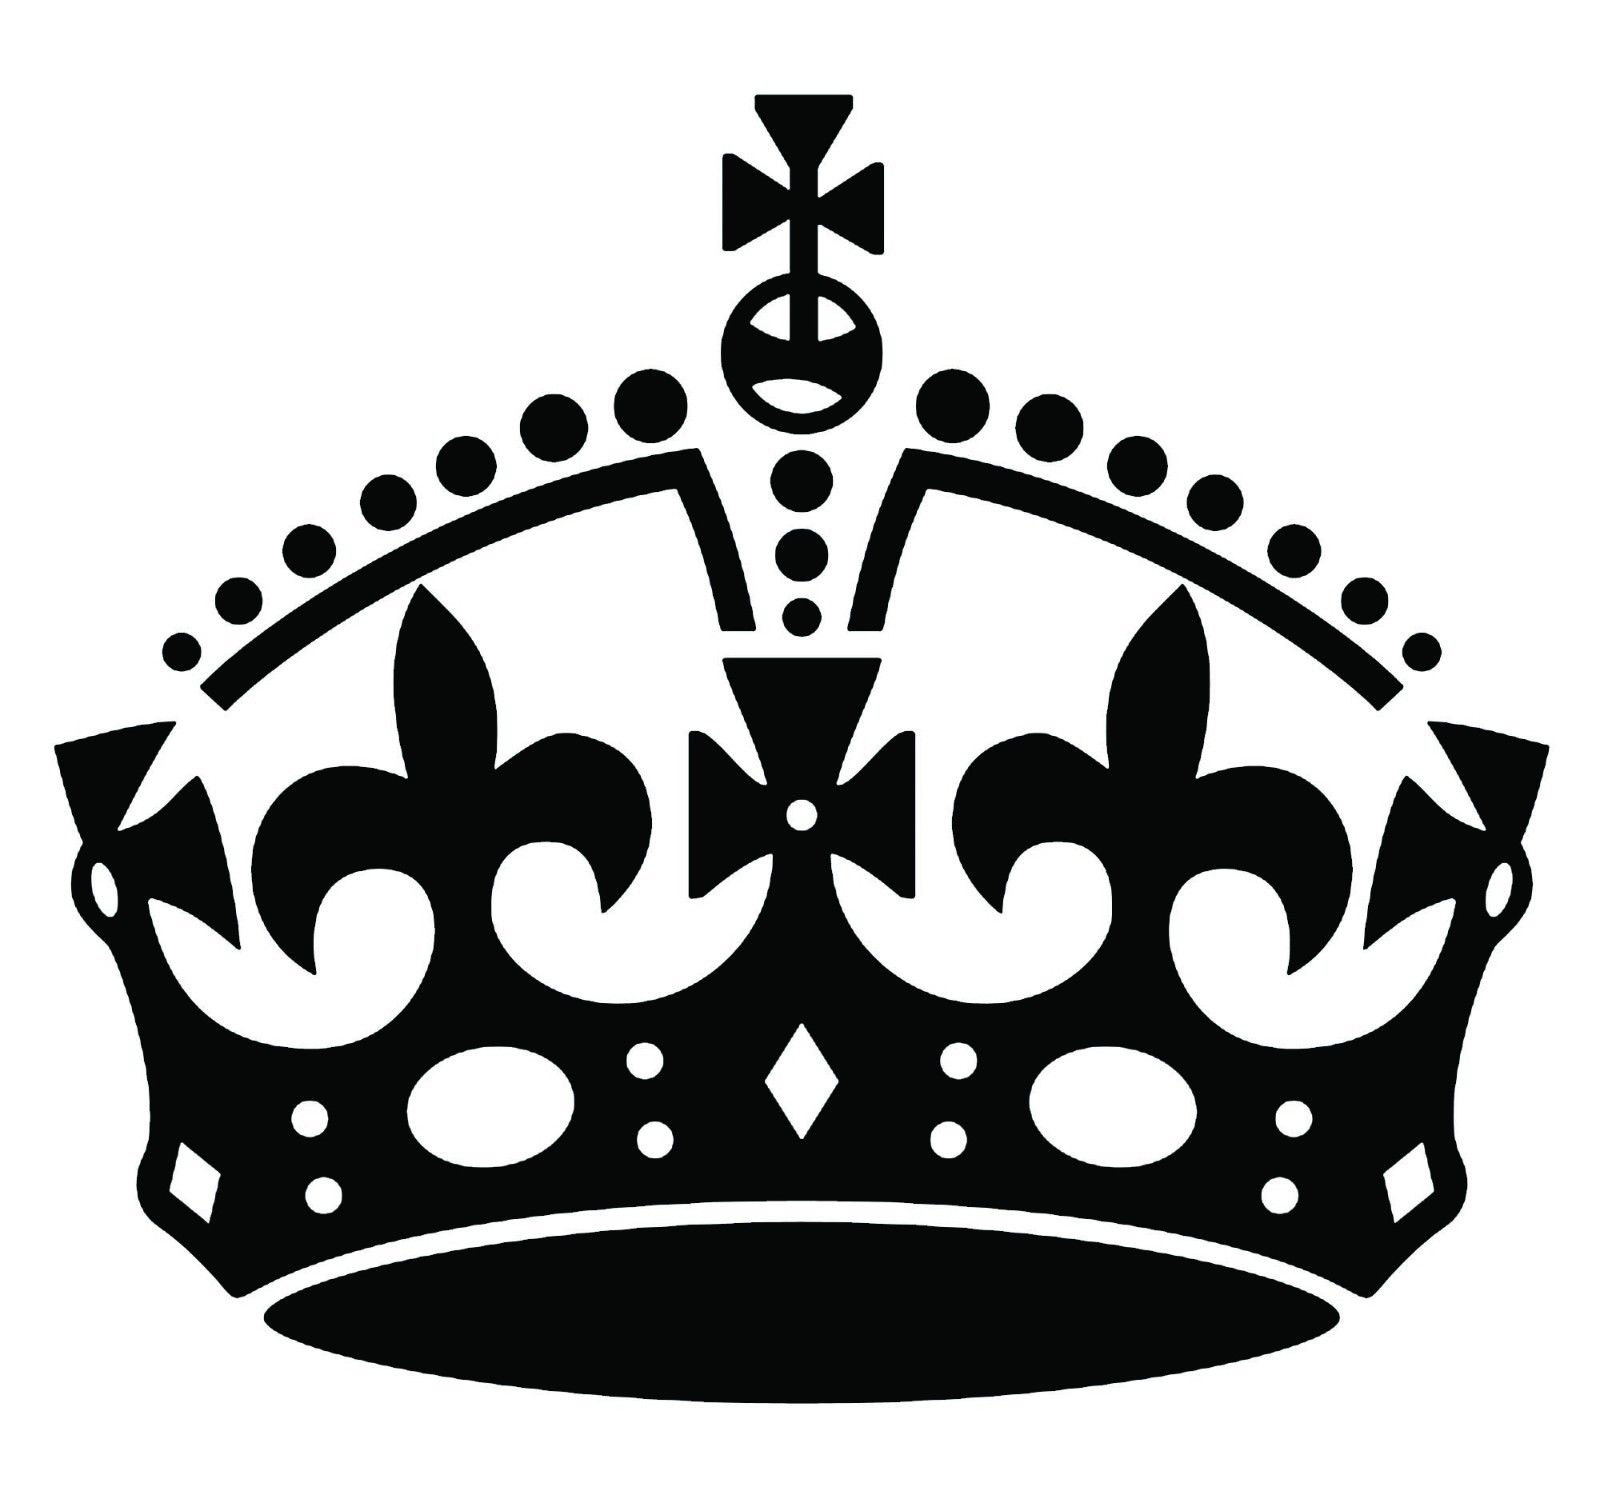 free crown clipart black and white - photo #39